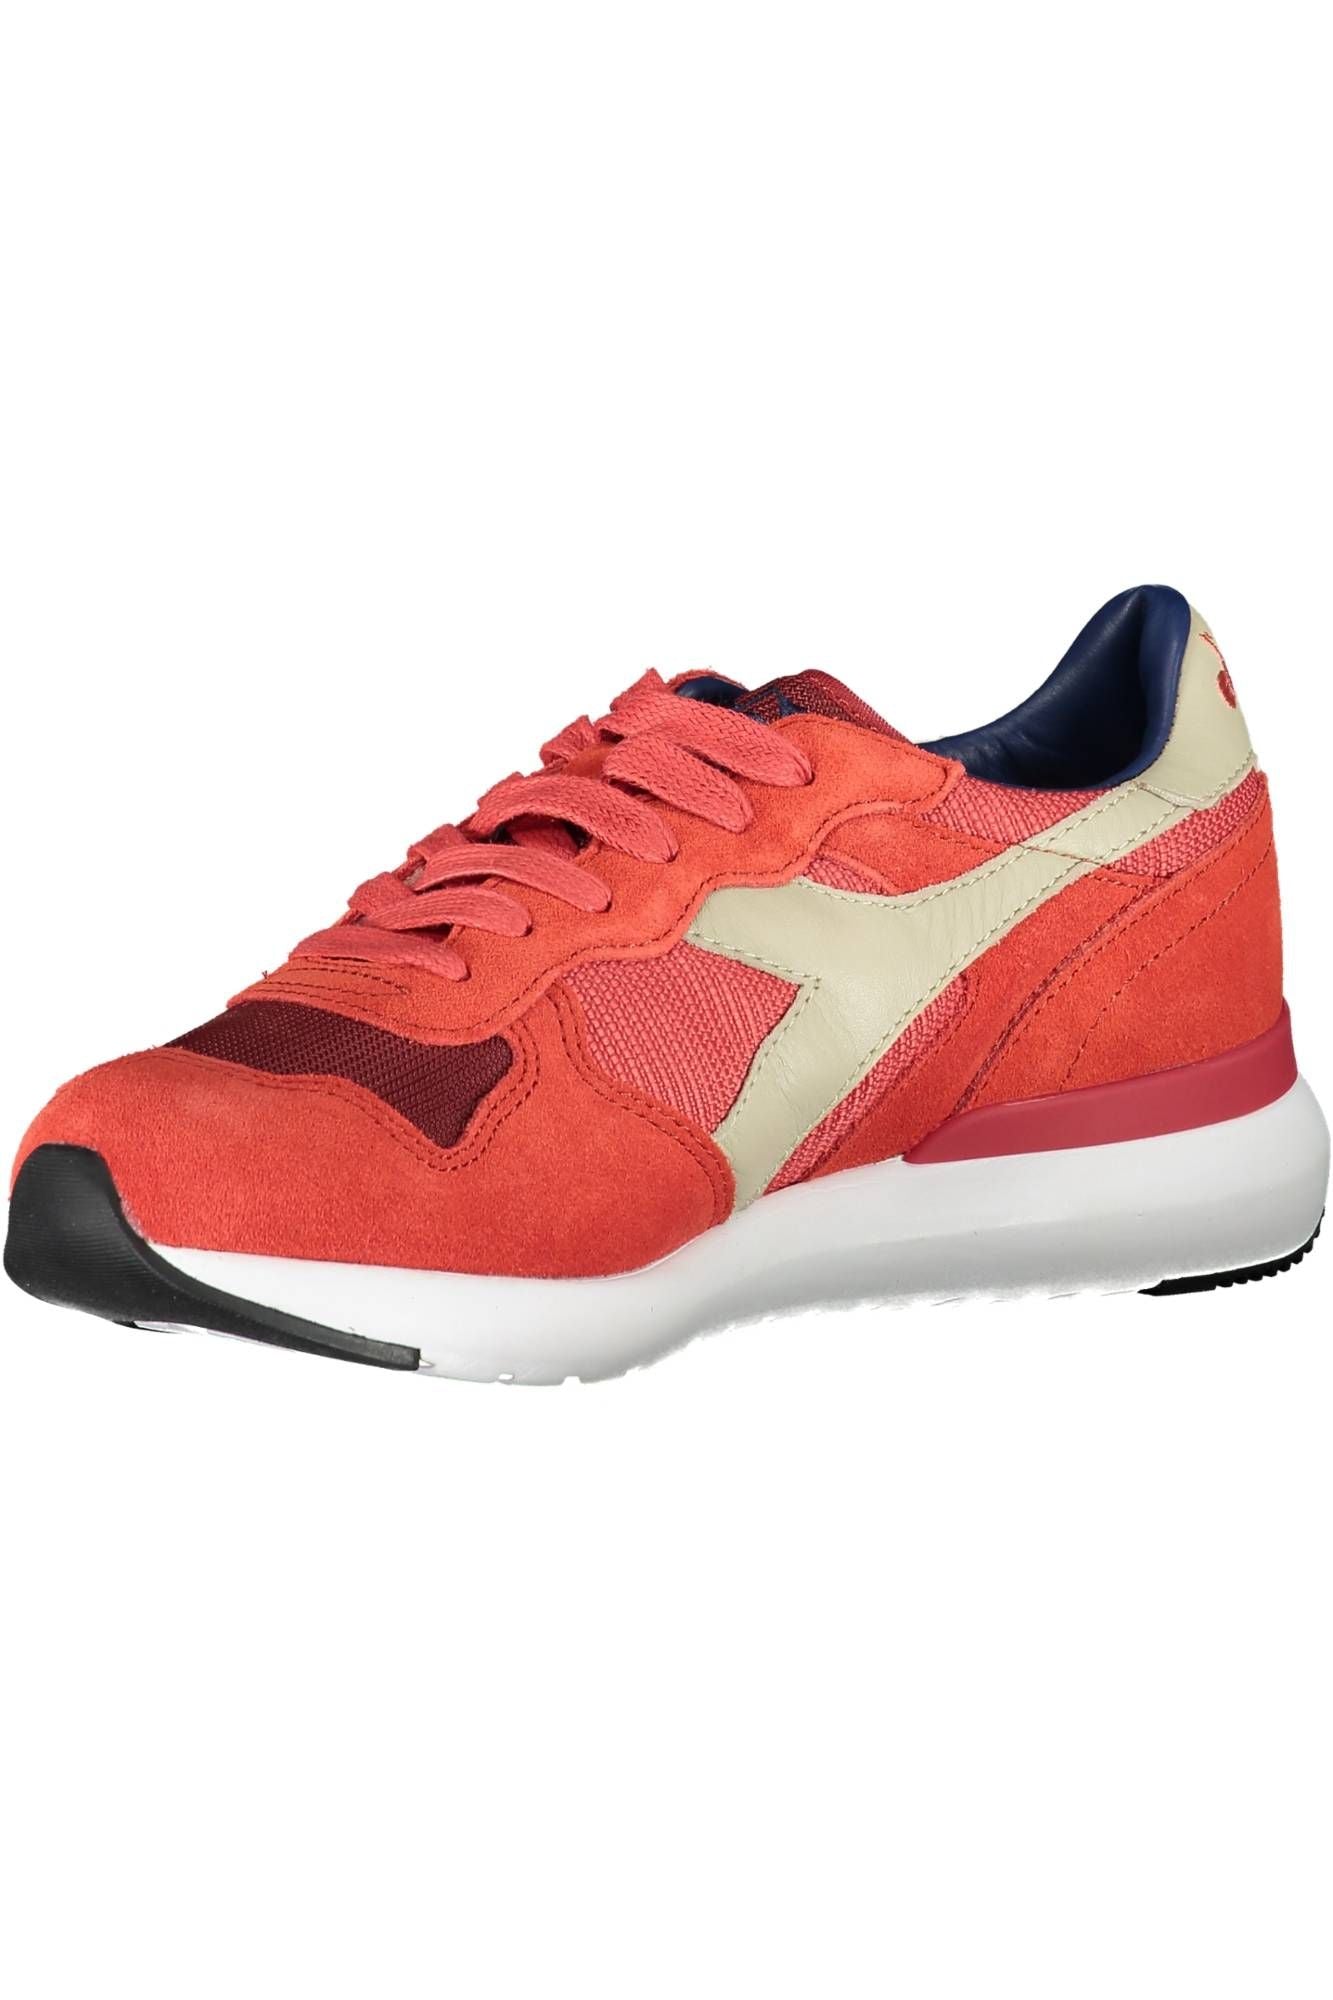 Sleek Red Athletic Sneakers with Contrasting Details